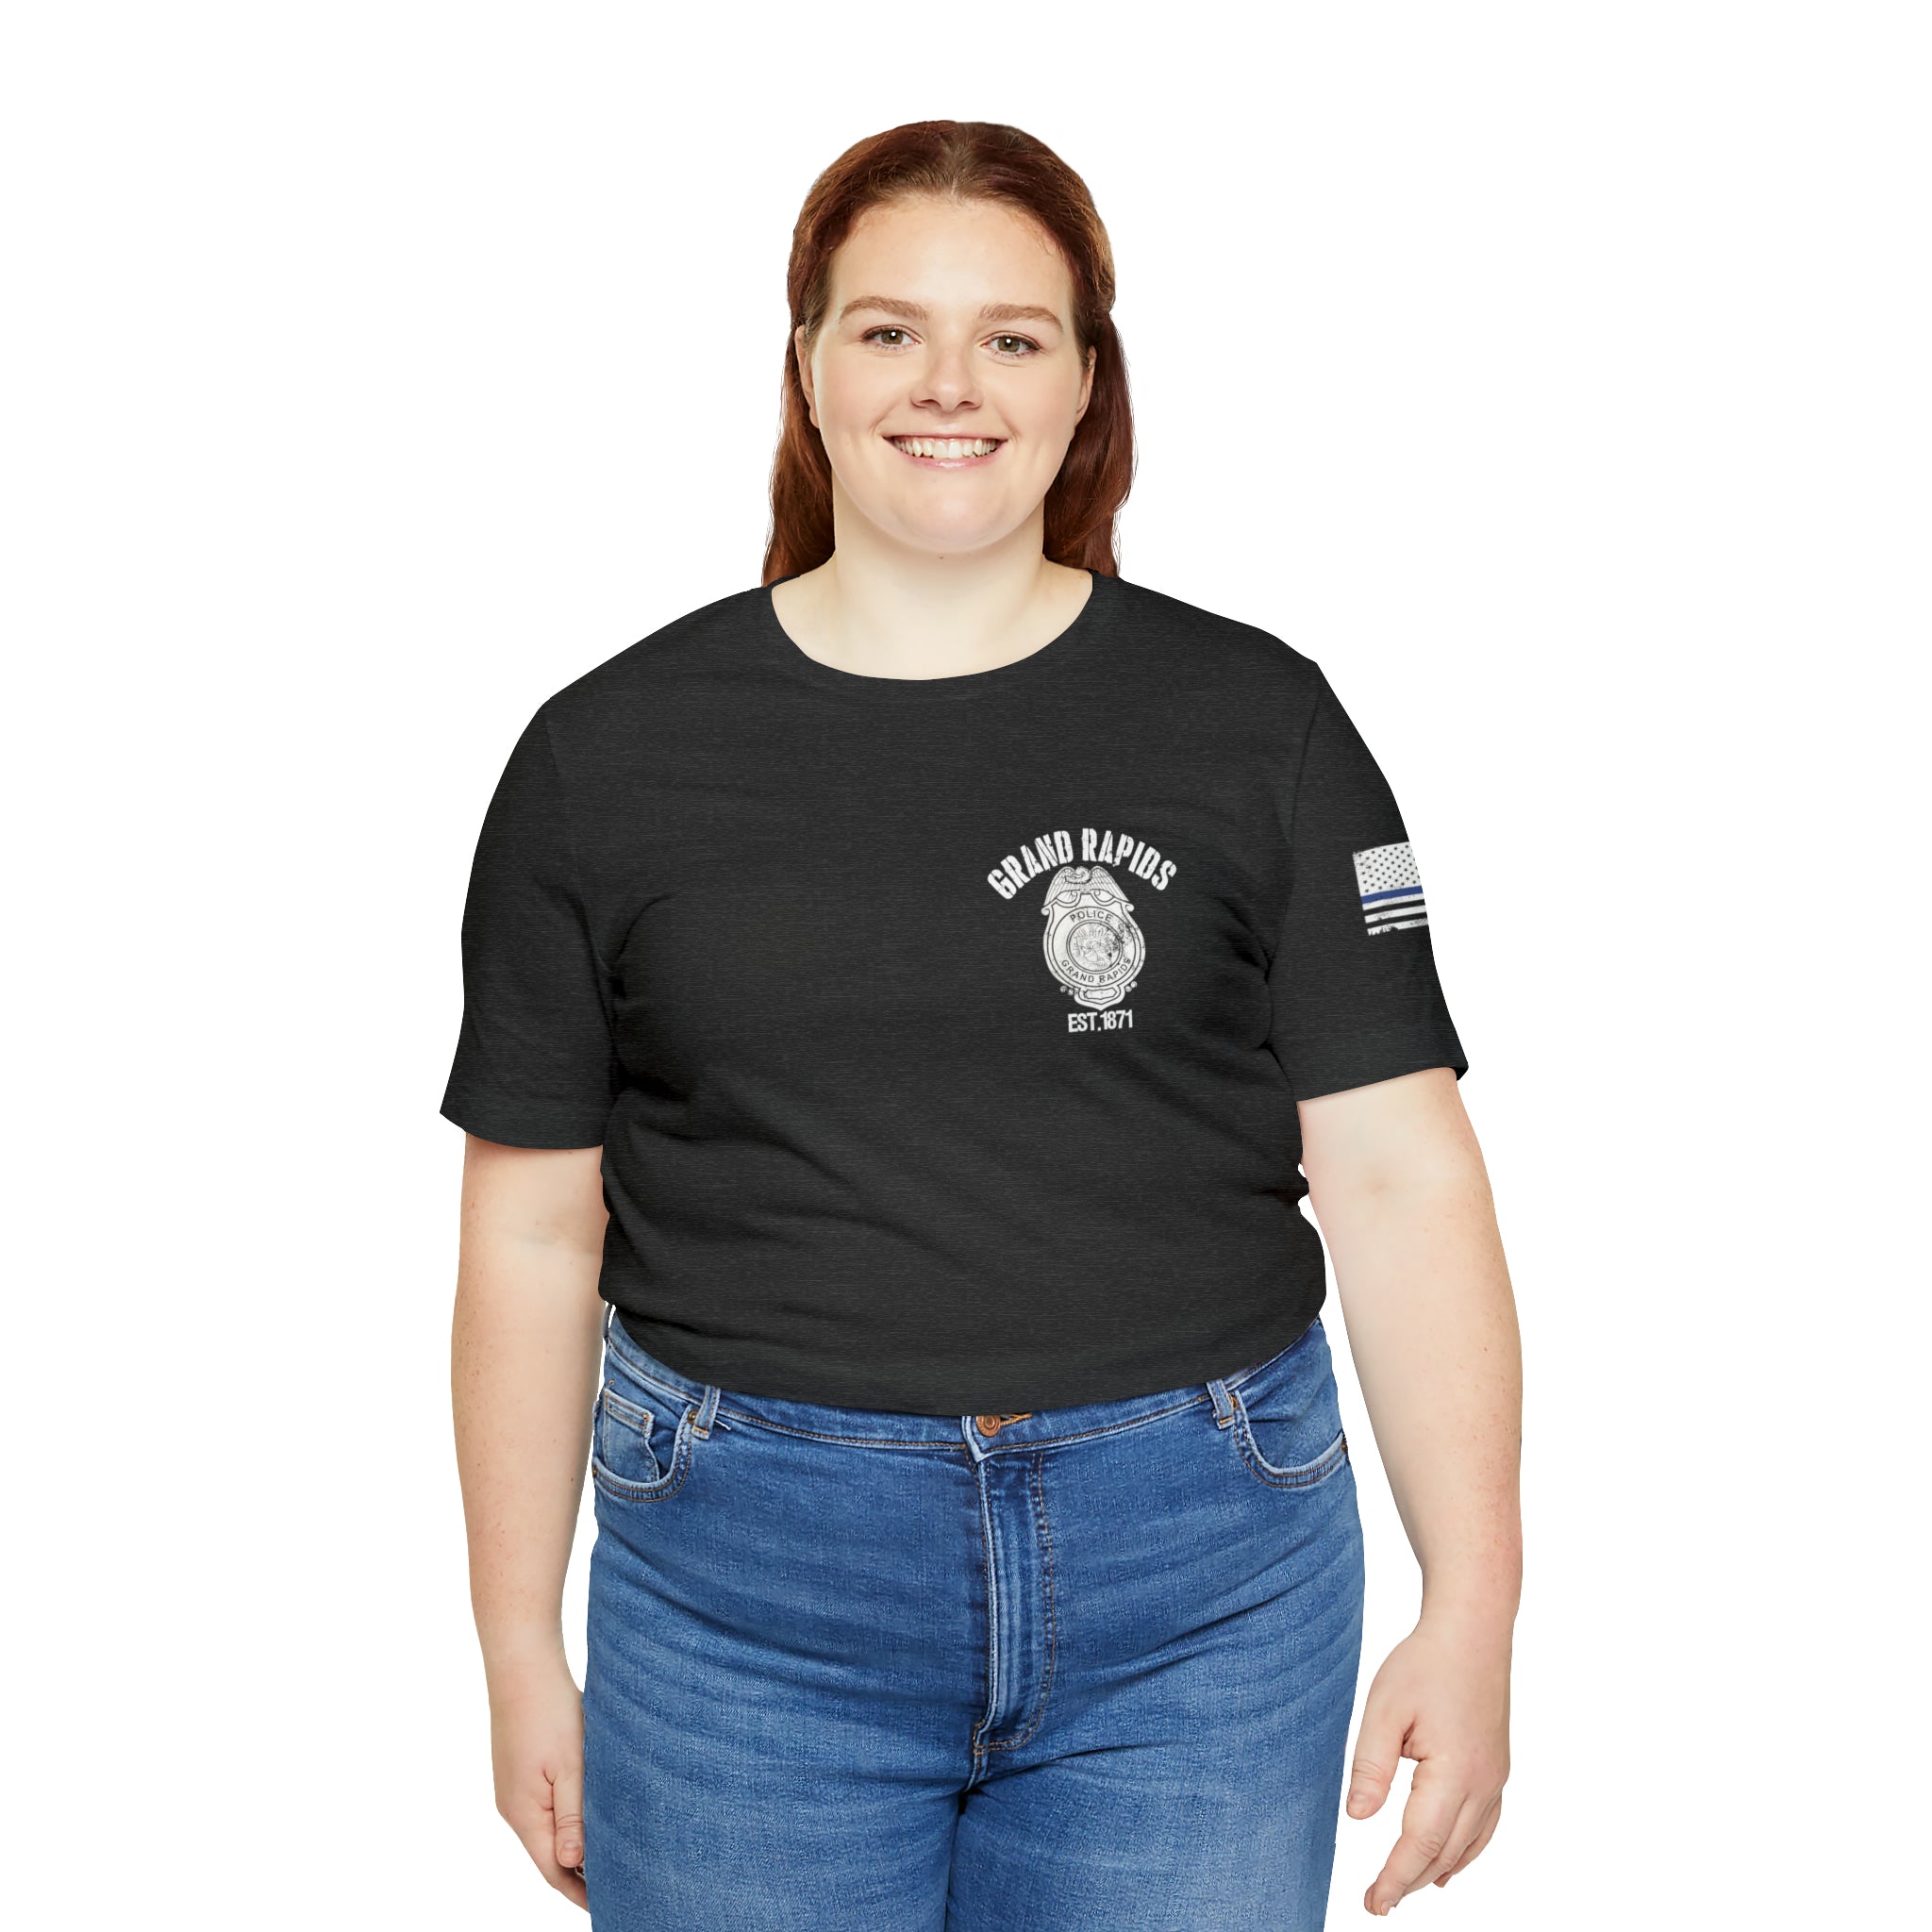 Our Grand Rapids Police Department Badge Tee